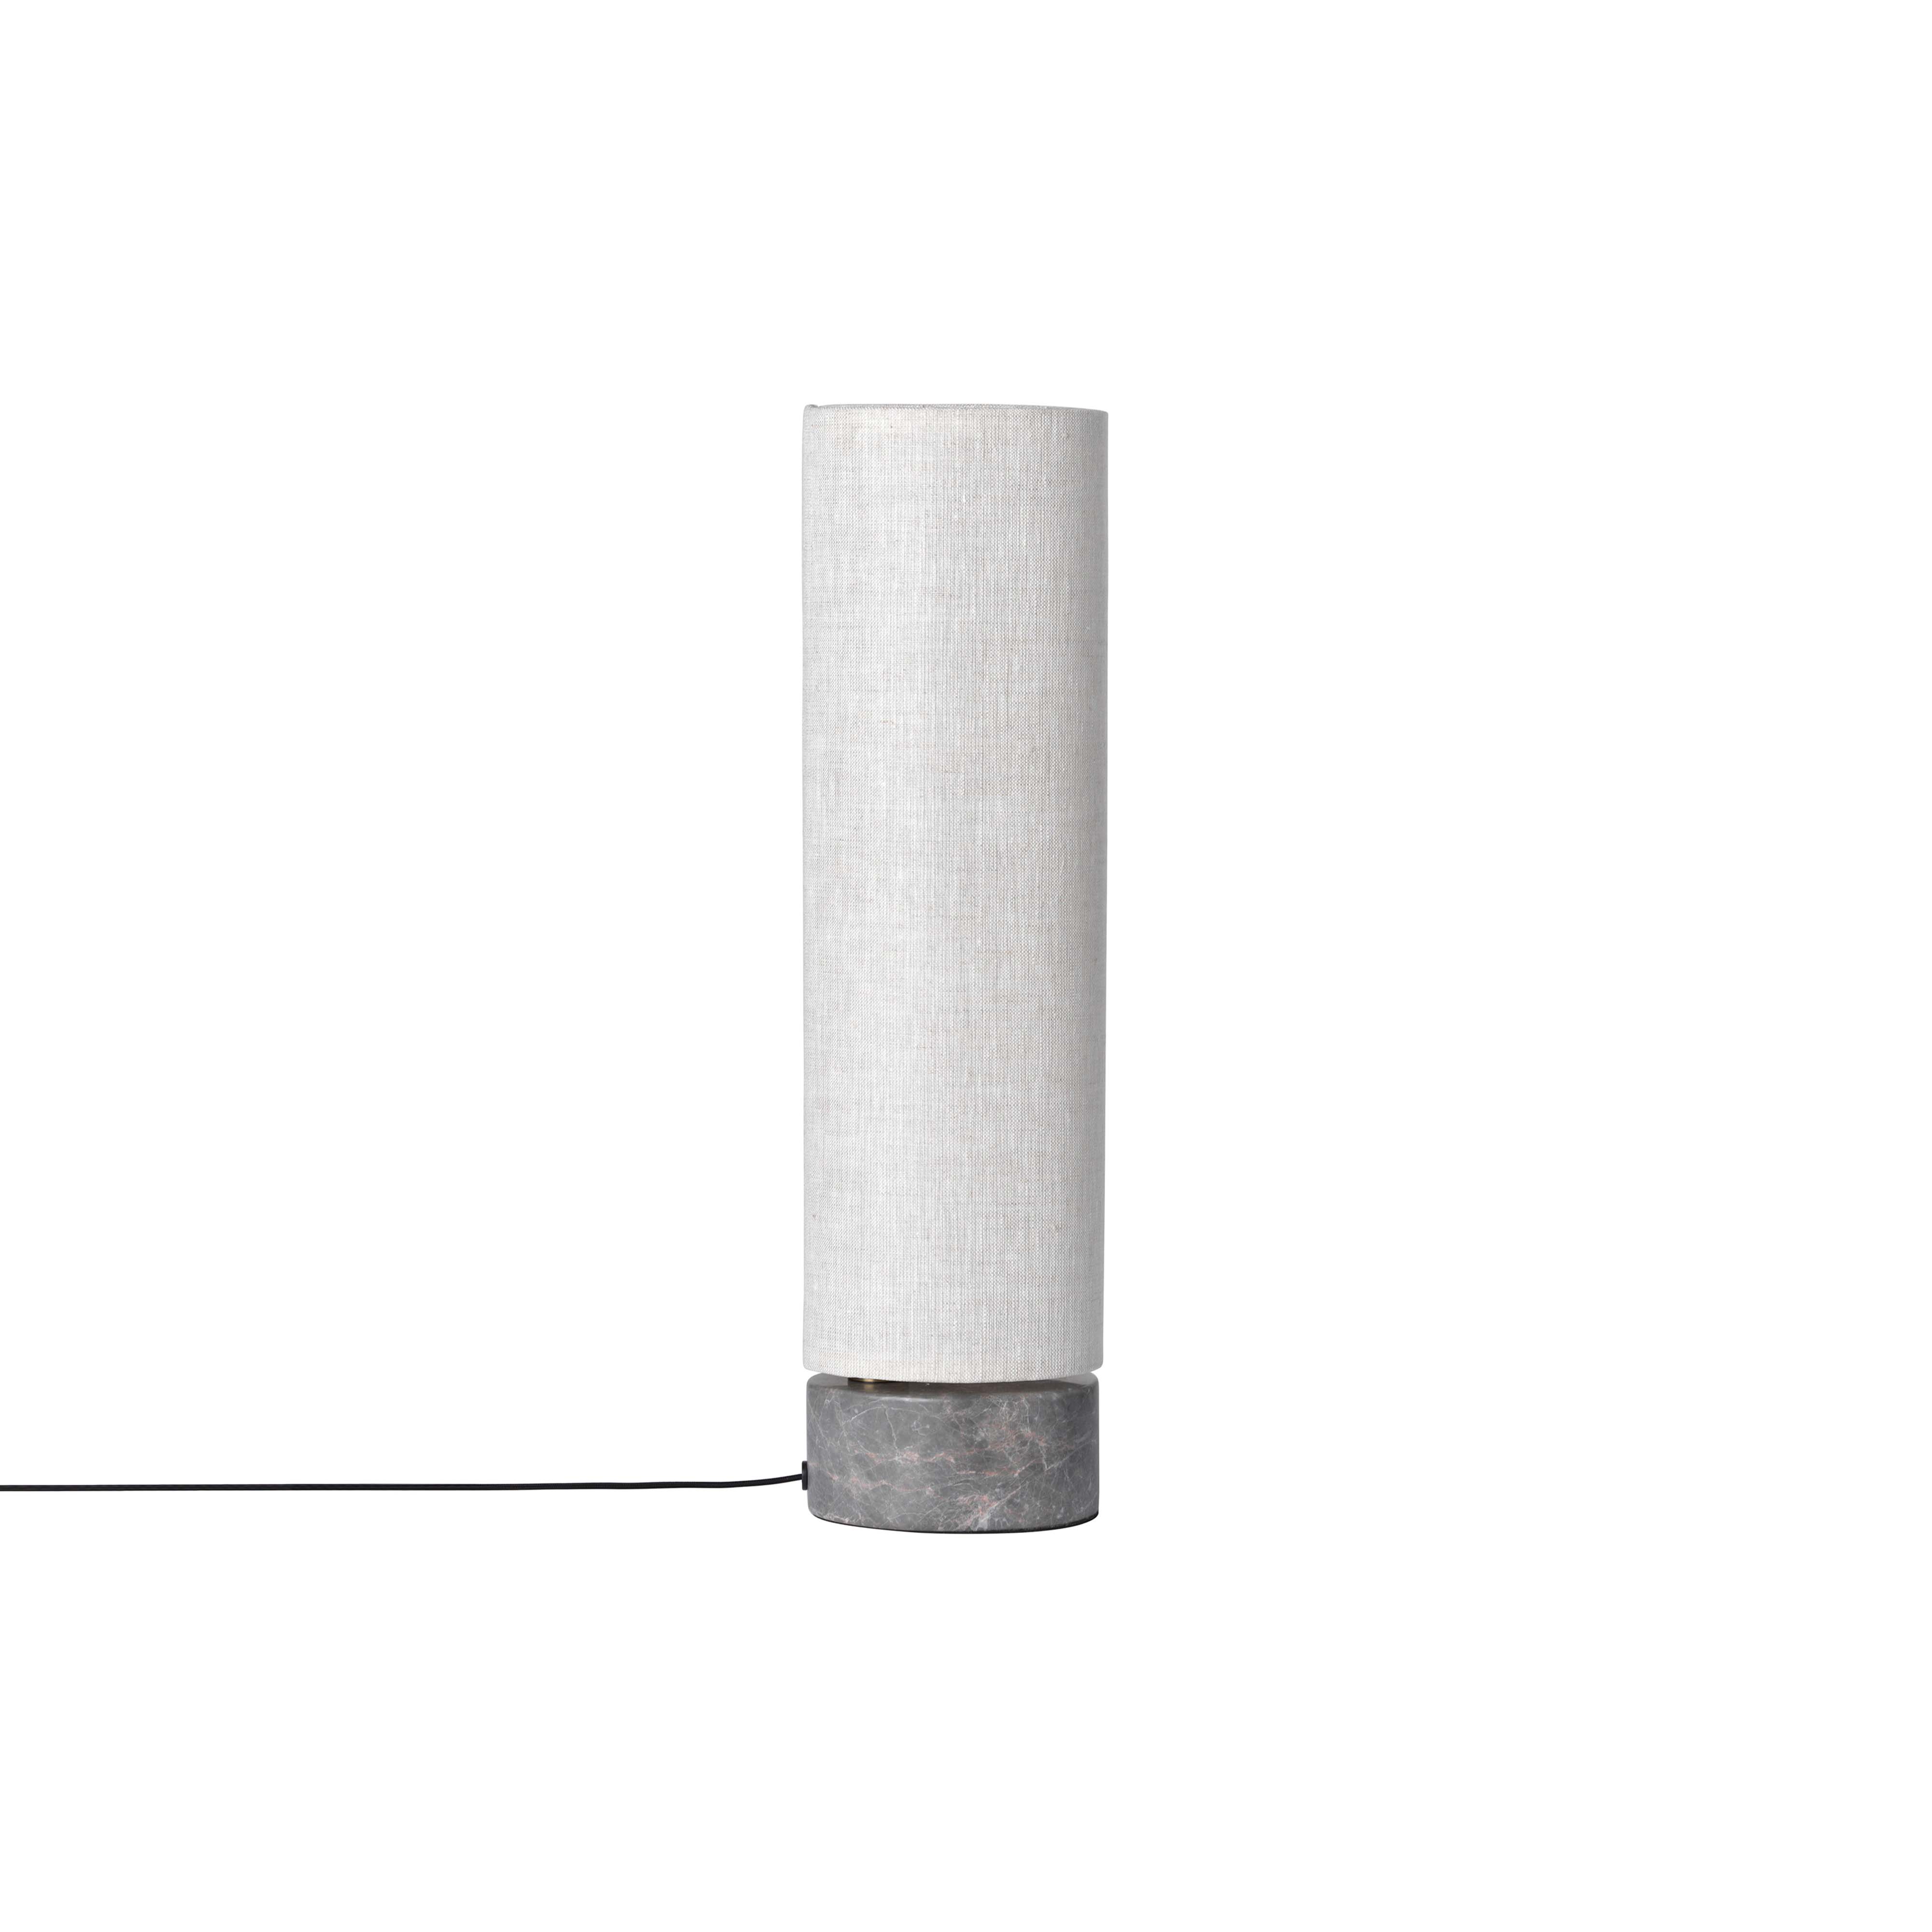 Unbound Table Lamp: Canvas